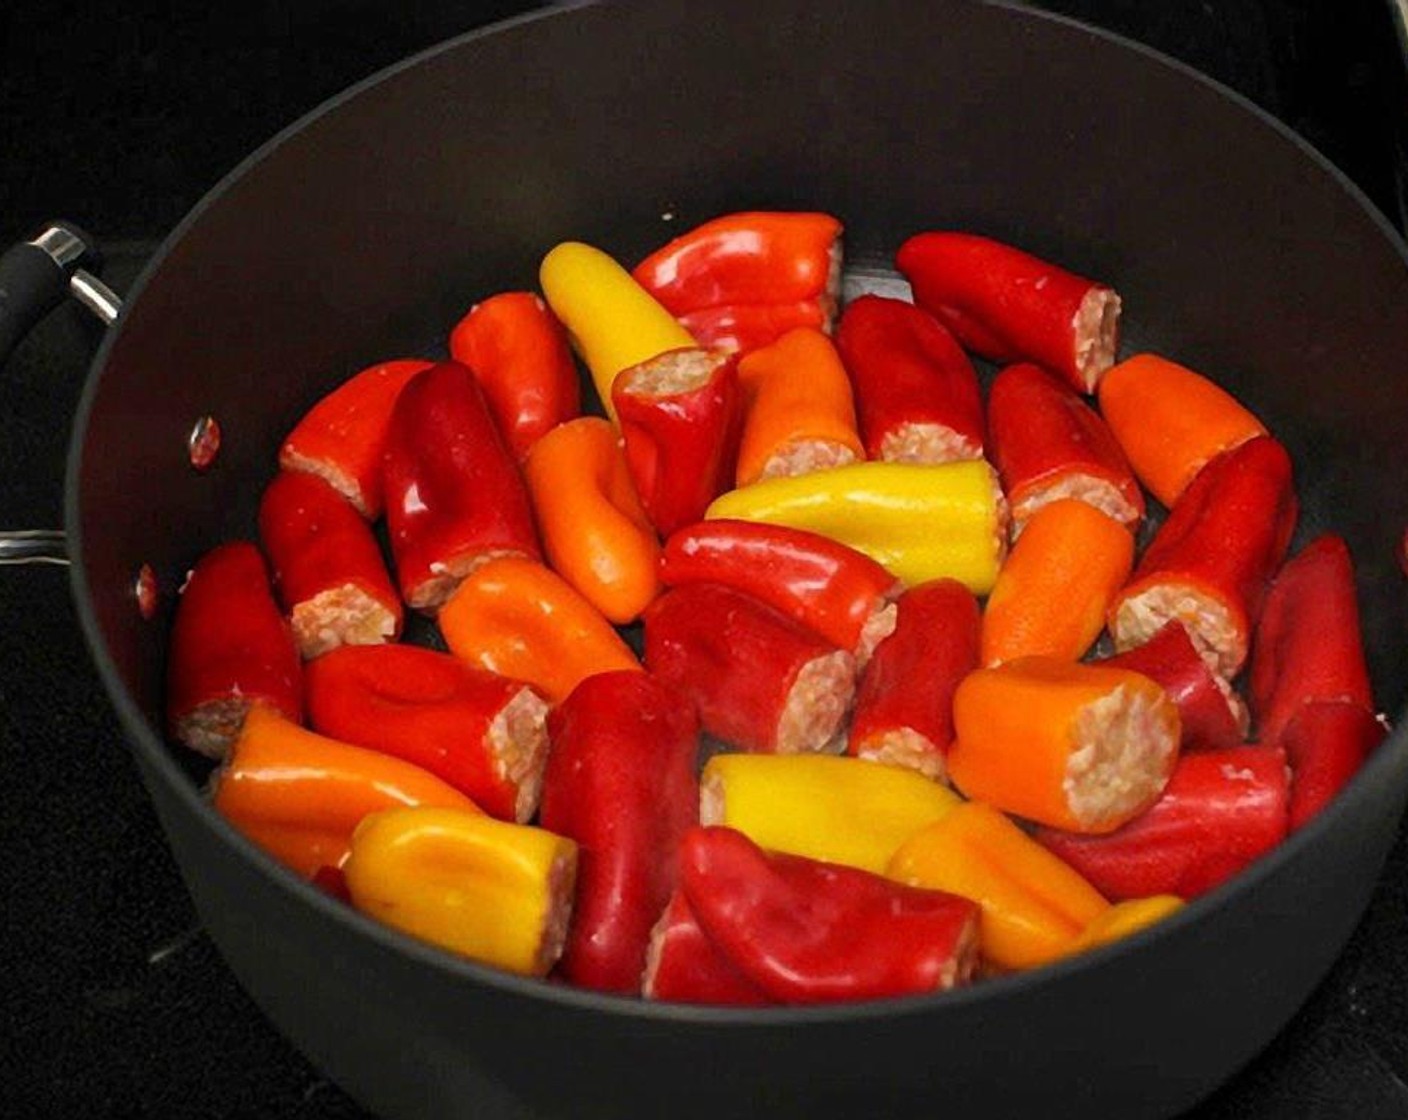 step 8 In a large pot or skillet, heat up 1 tablespoon of Olive Oil (1 Tbsp) on medium high heat. Add the peppers and sear for about 2 minutes per side. If all your peppers don't fit in one layer, switch the peppers.